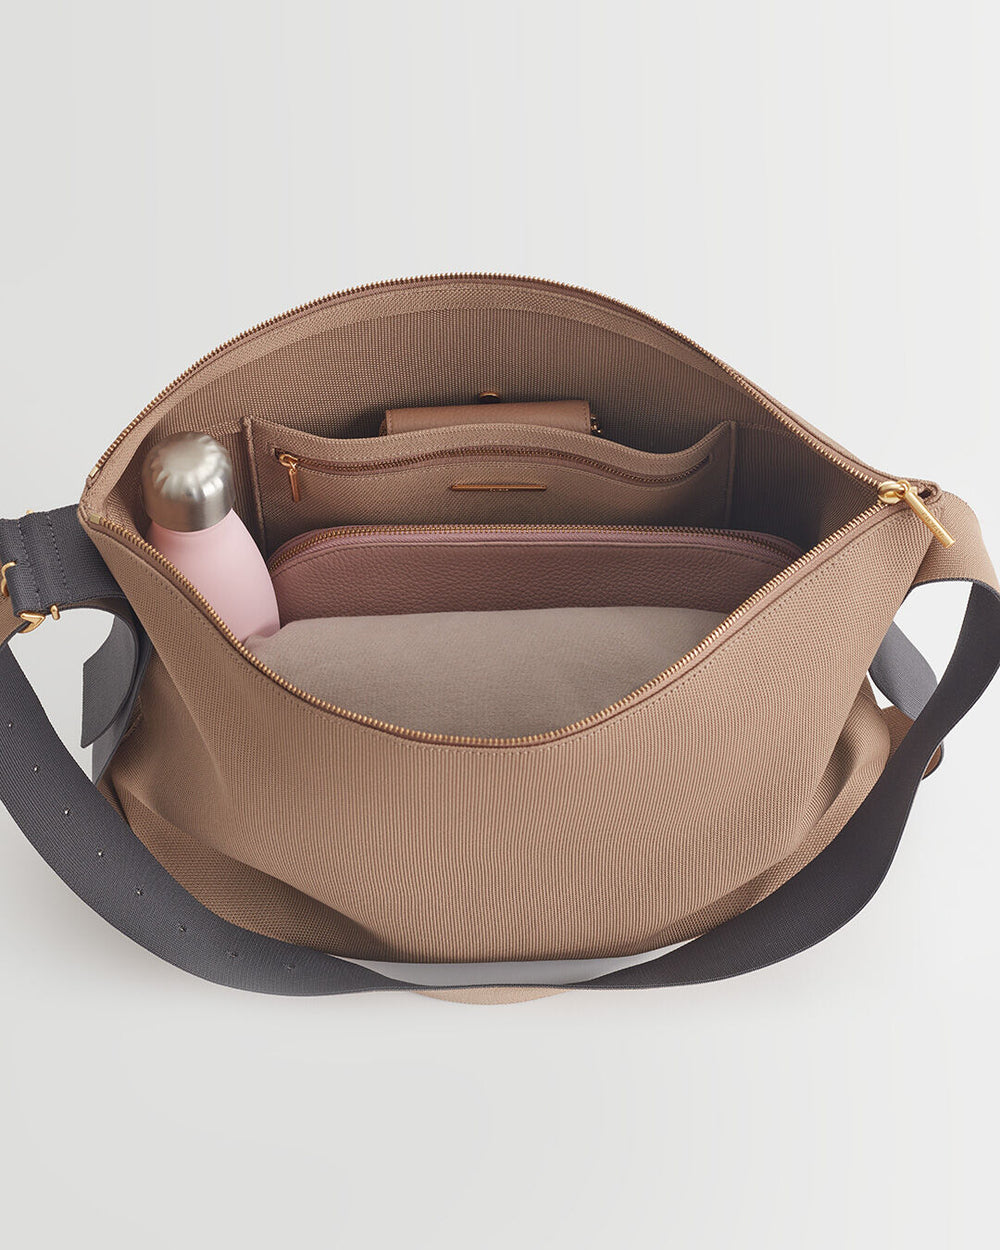 Open handbag showing internal compartments with a bottle inside.